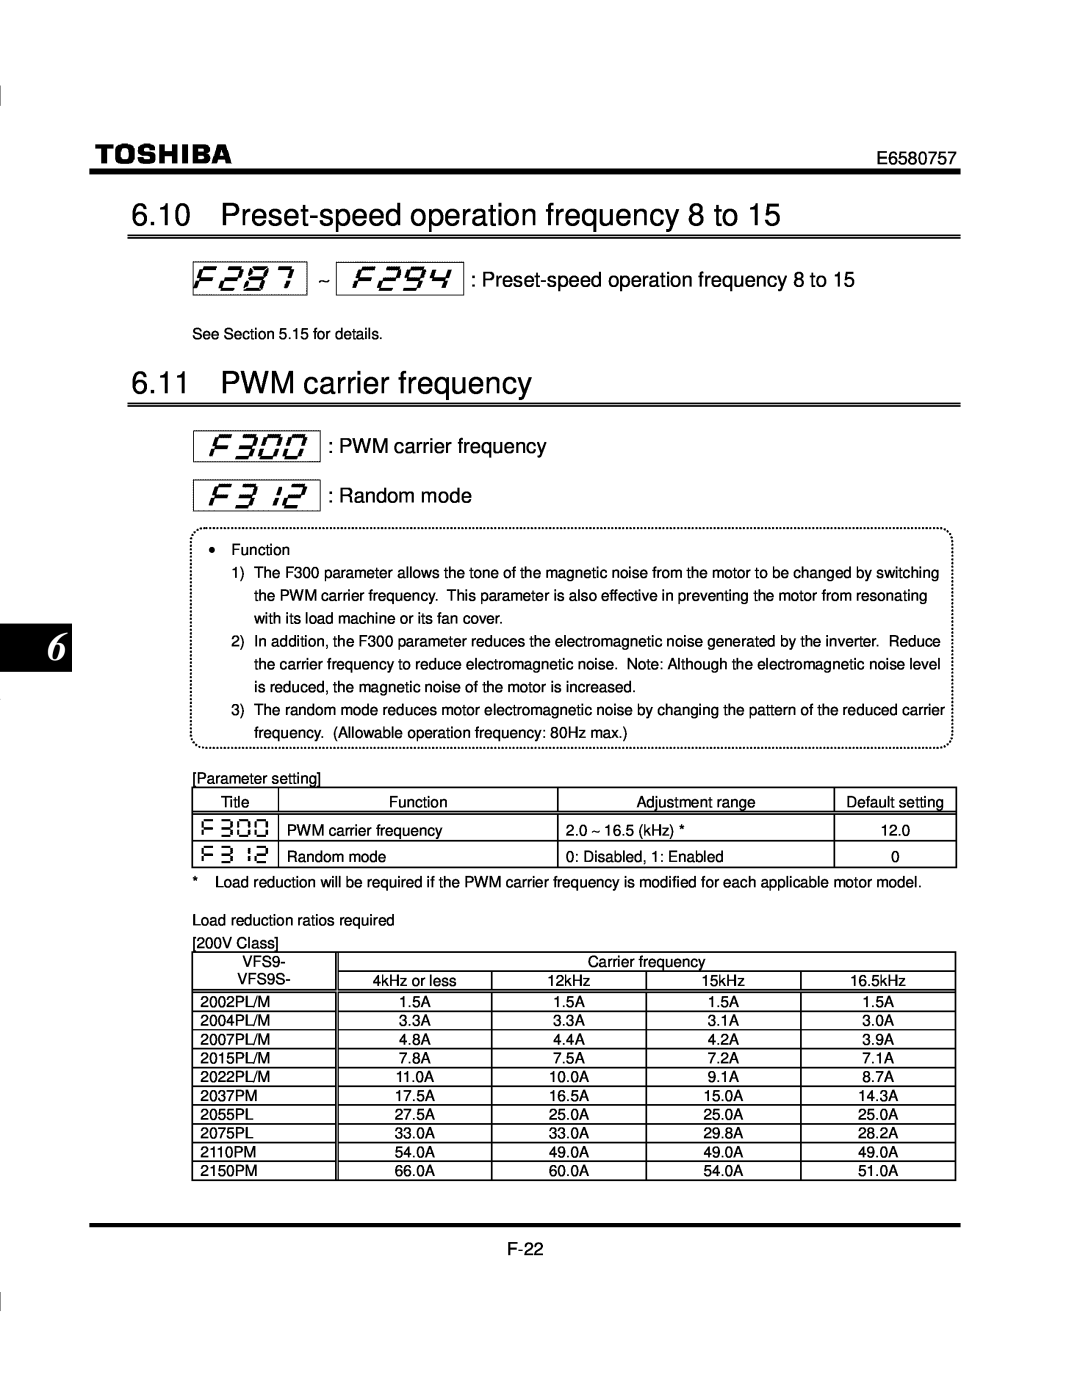 Toshiba VF-S9 manual PWM carrier frequency, ∼ Preset-speed operation frequency 8 to, Random mode 